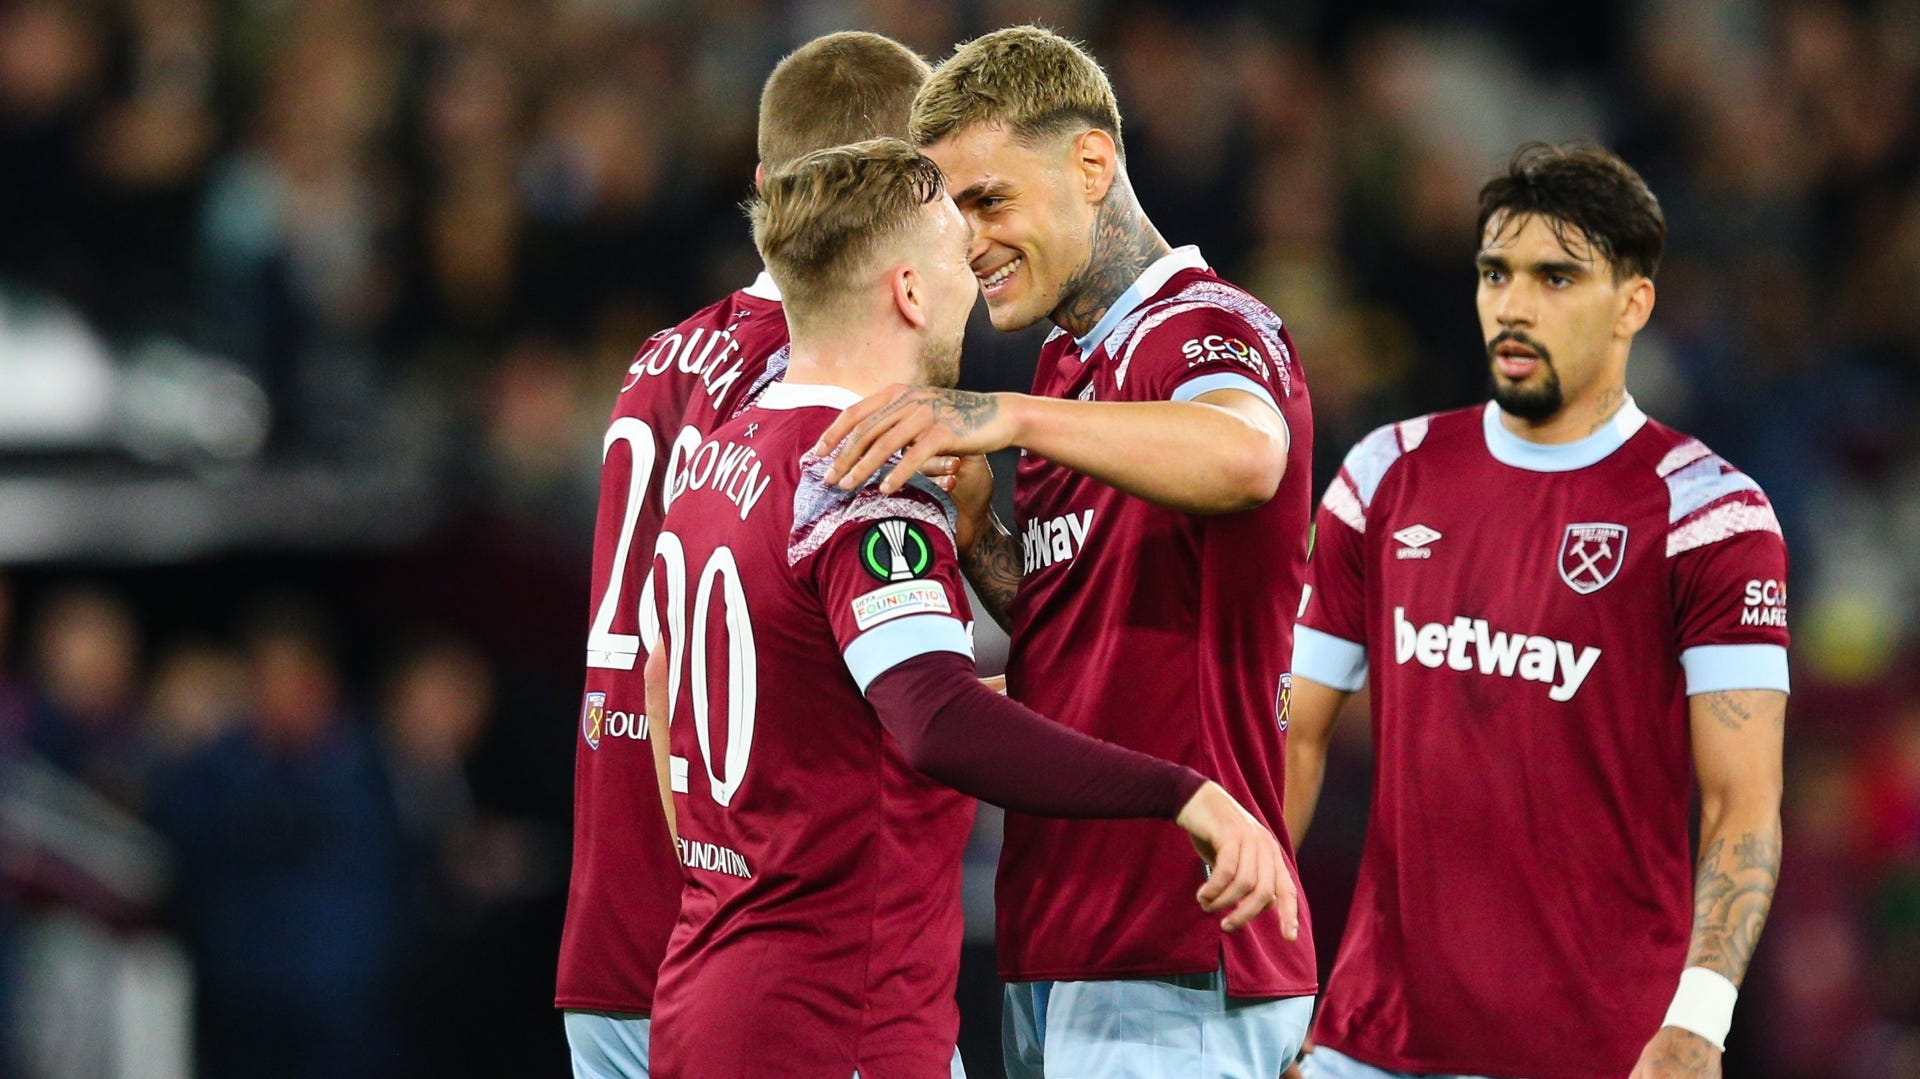 West Ham vs Southampton Where to watch the match online, live stream, TV channels and kick-off time Goal US